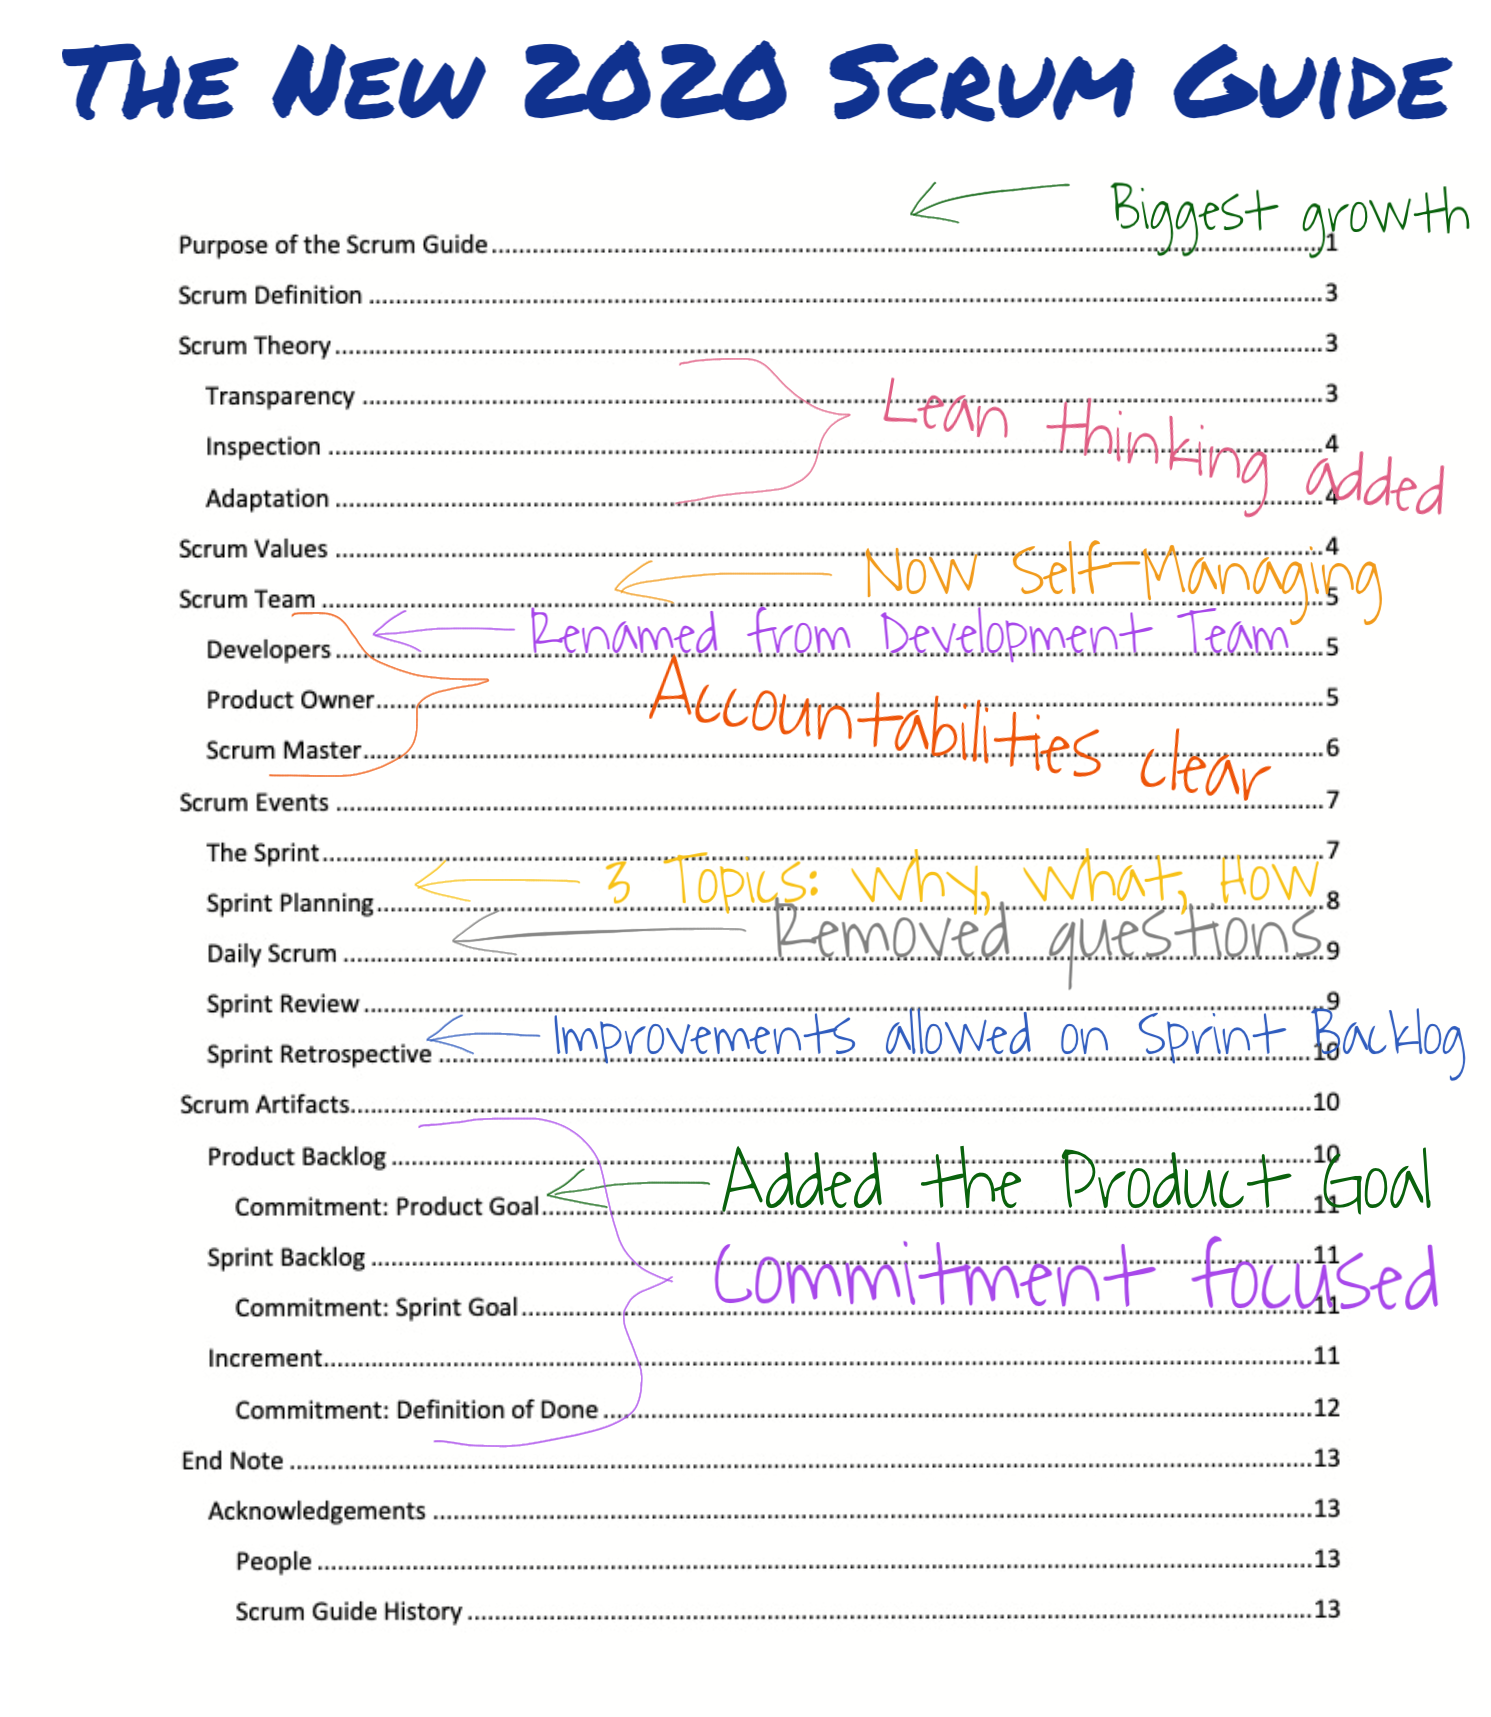 New Scrum Guide 2020 - changespng